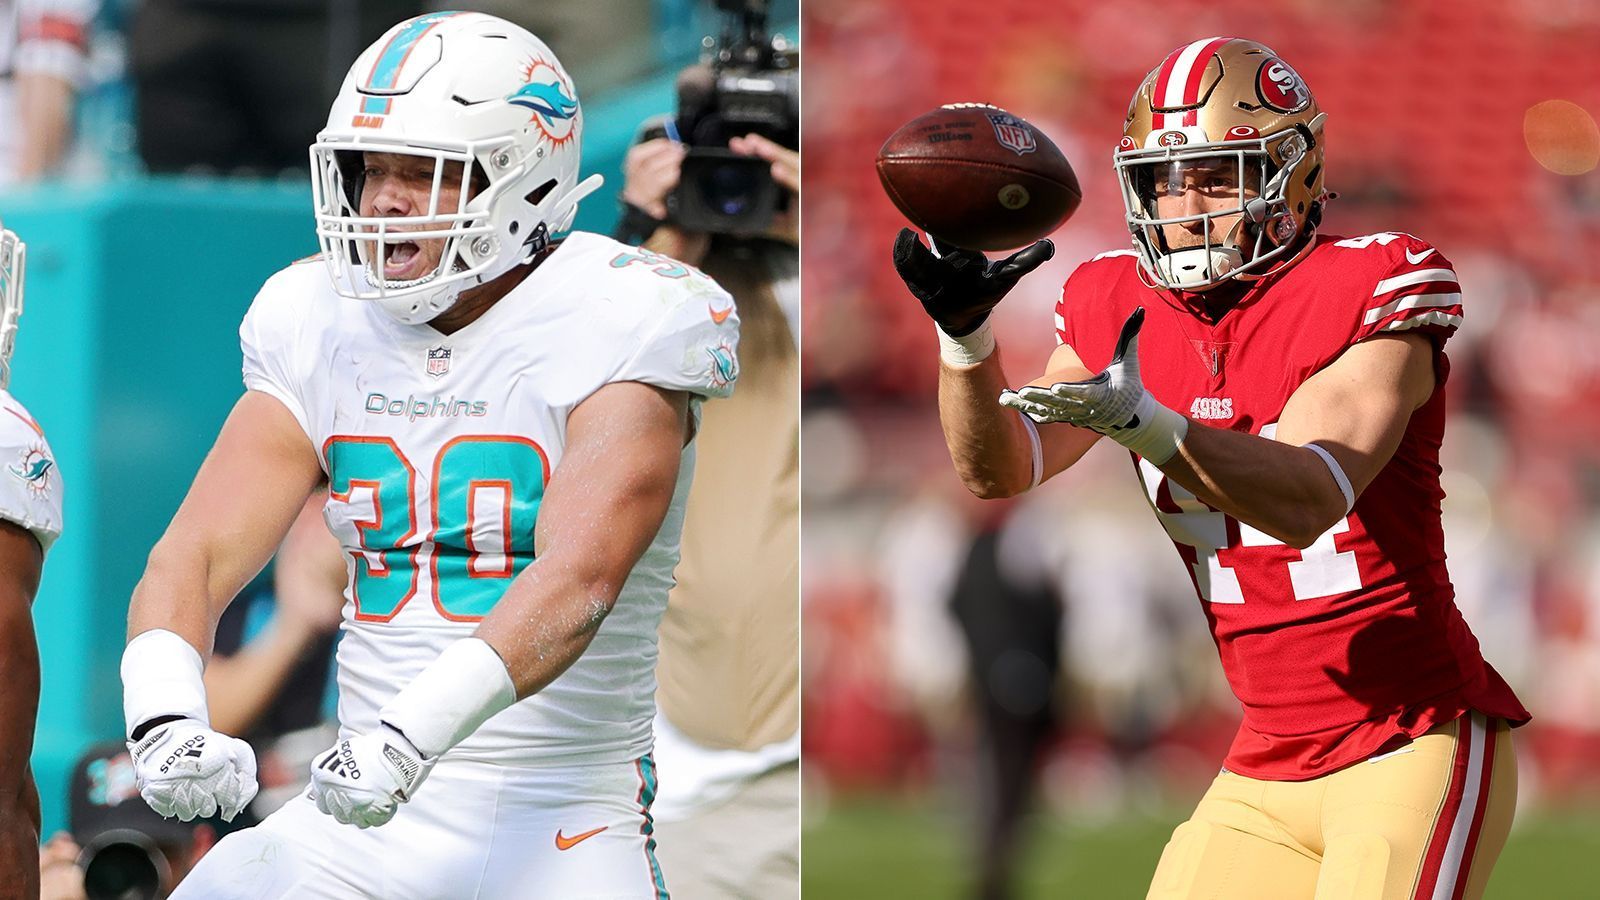 
                <strong>Fullbacks mit den meisten Stimmen</strong><br>
                &#x2022; AFC: Alec Ingold, Miami Dolphins<br>&#x2022; NFC: Kyle Juszczyk, San Francisco 49ers<br>
              